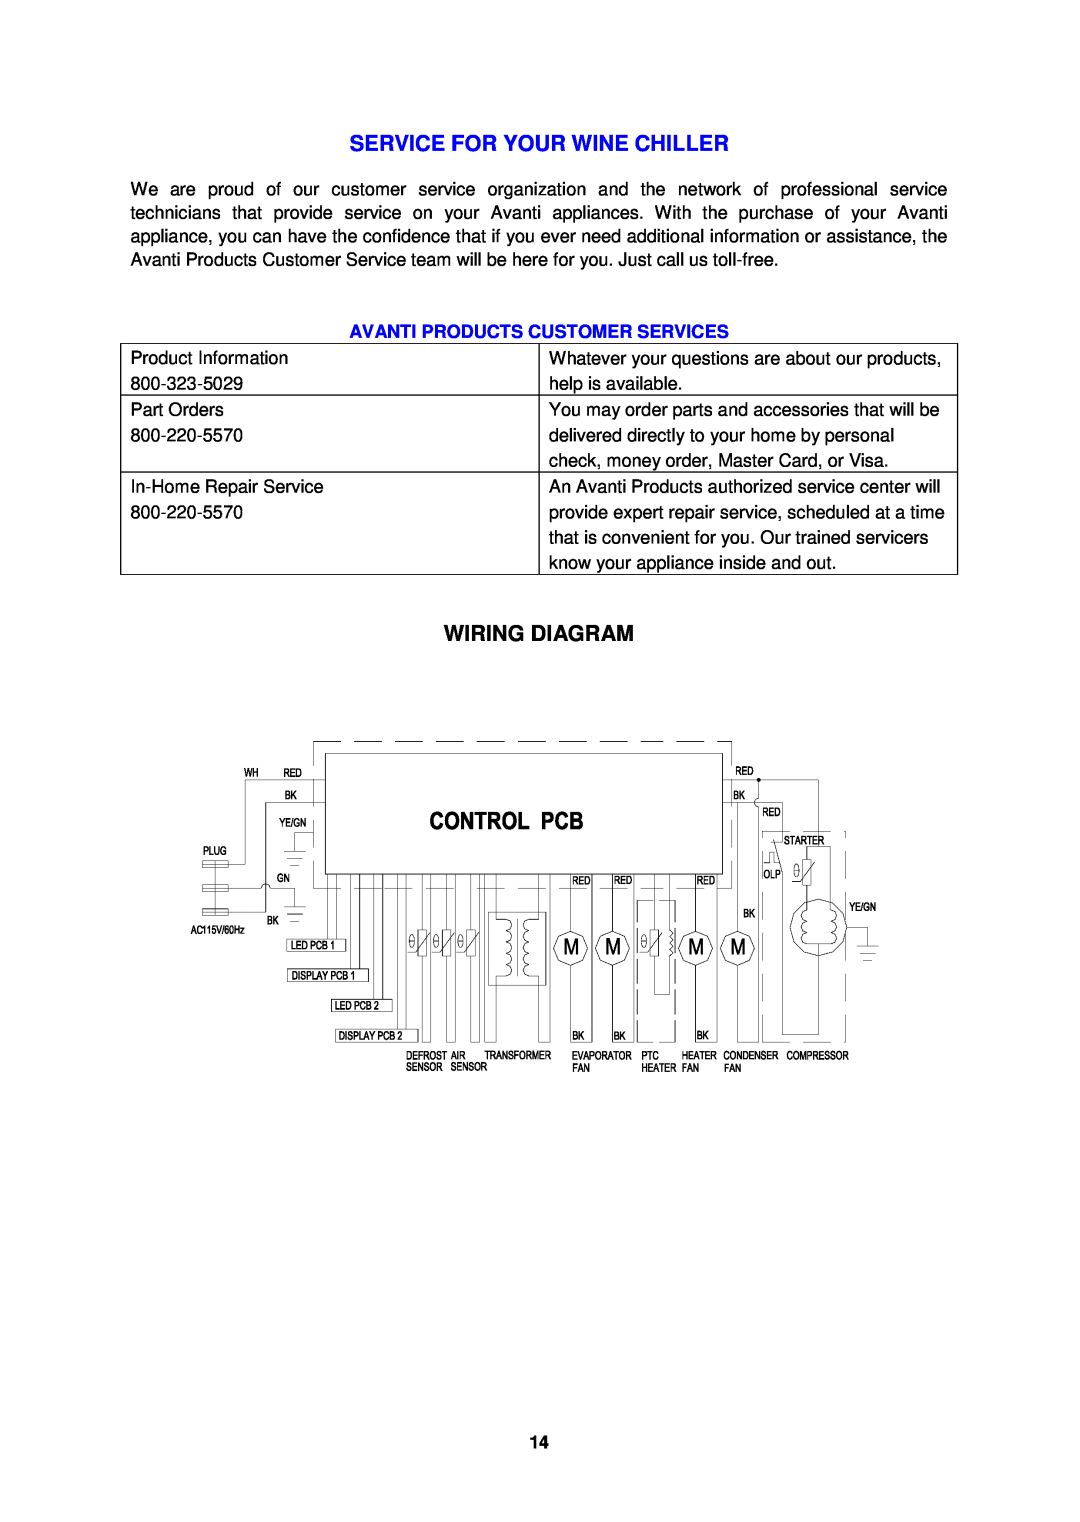 Avanti WCR683DZD-1 instruction manual Service For Your Wine Chiller, Wiring Diagram, Avanti Products Customer Services 